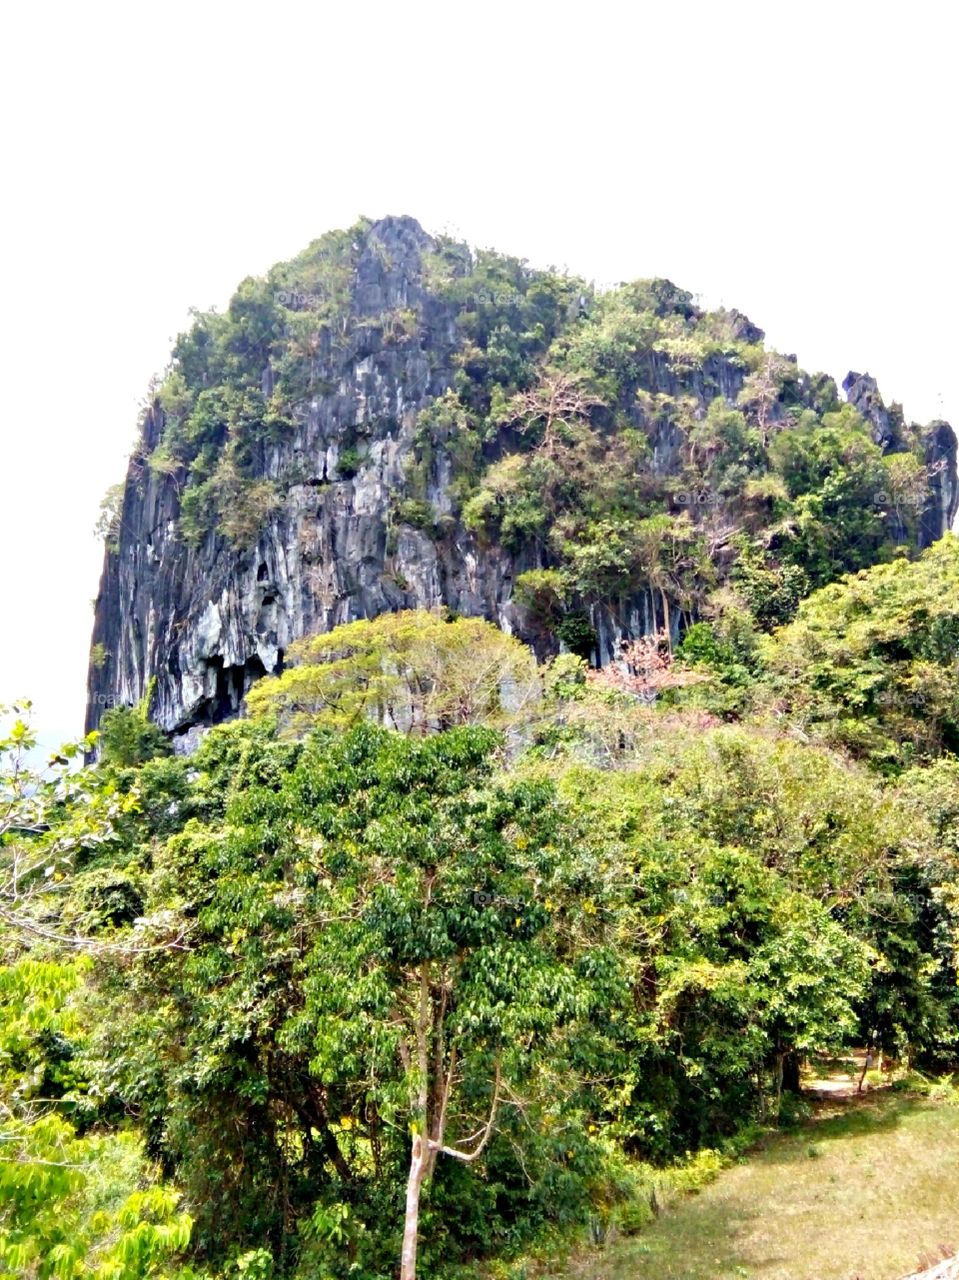 ille Cave in El Nido, Palawan, Philippines